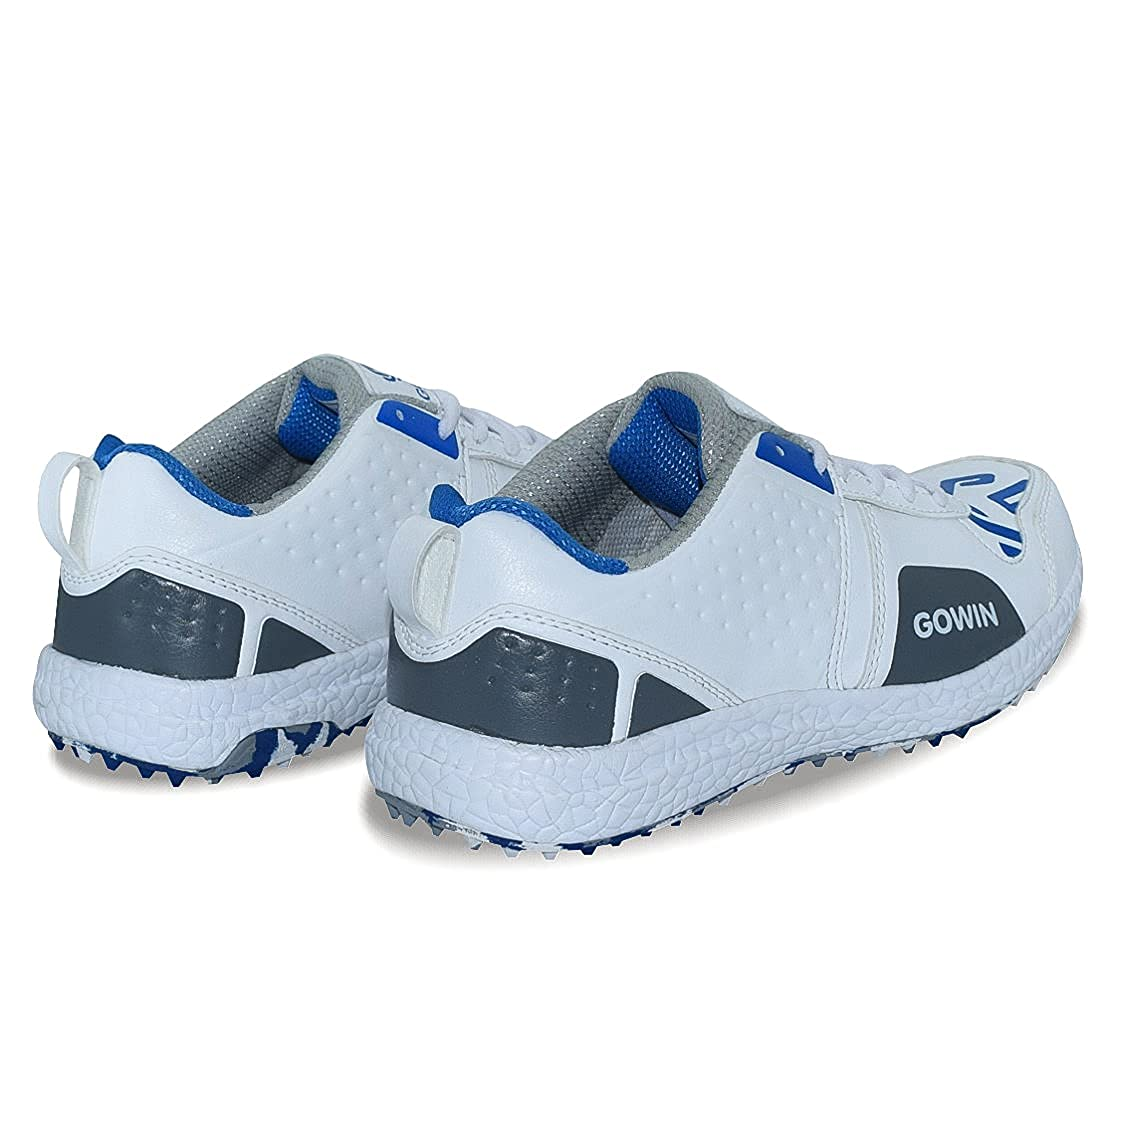 Gowin Pace-2 Cricket Shoes Junior